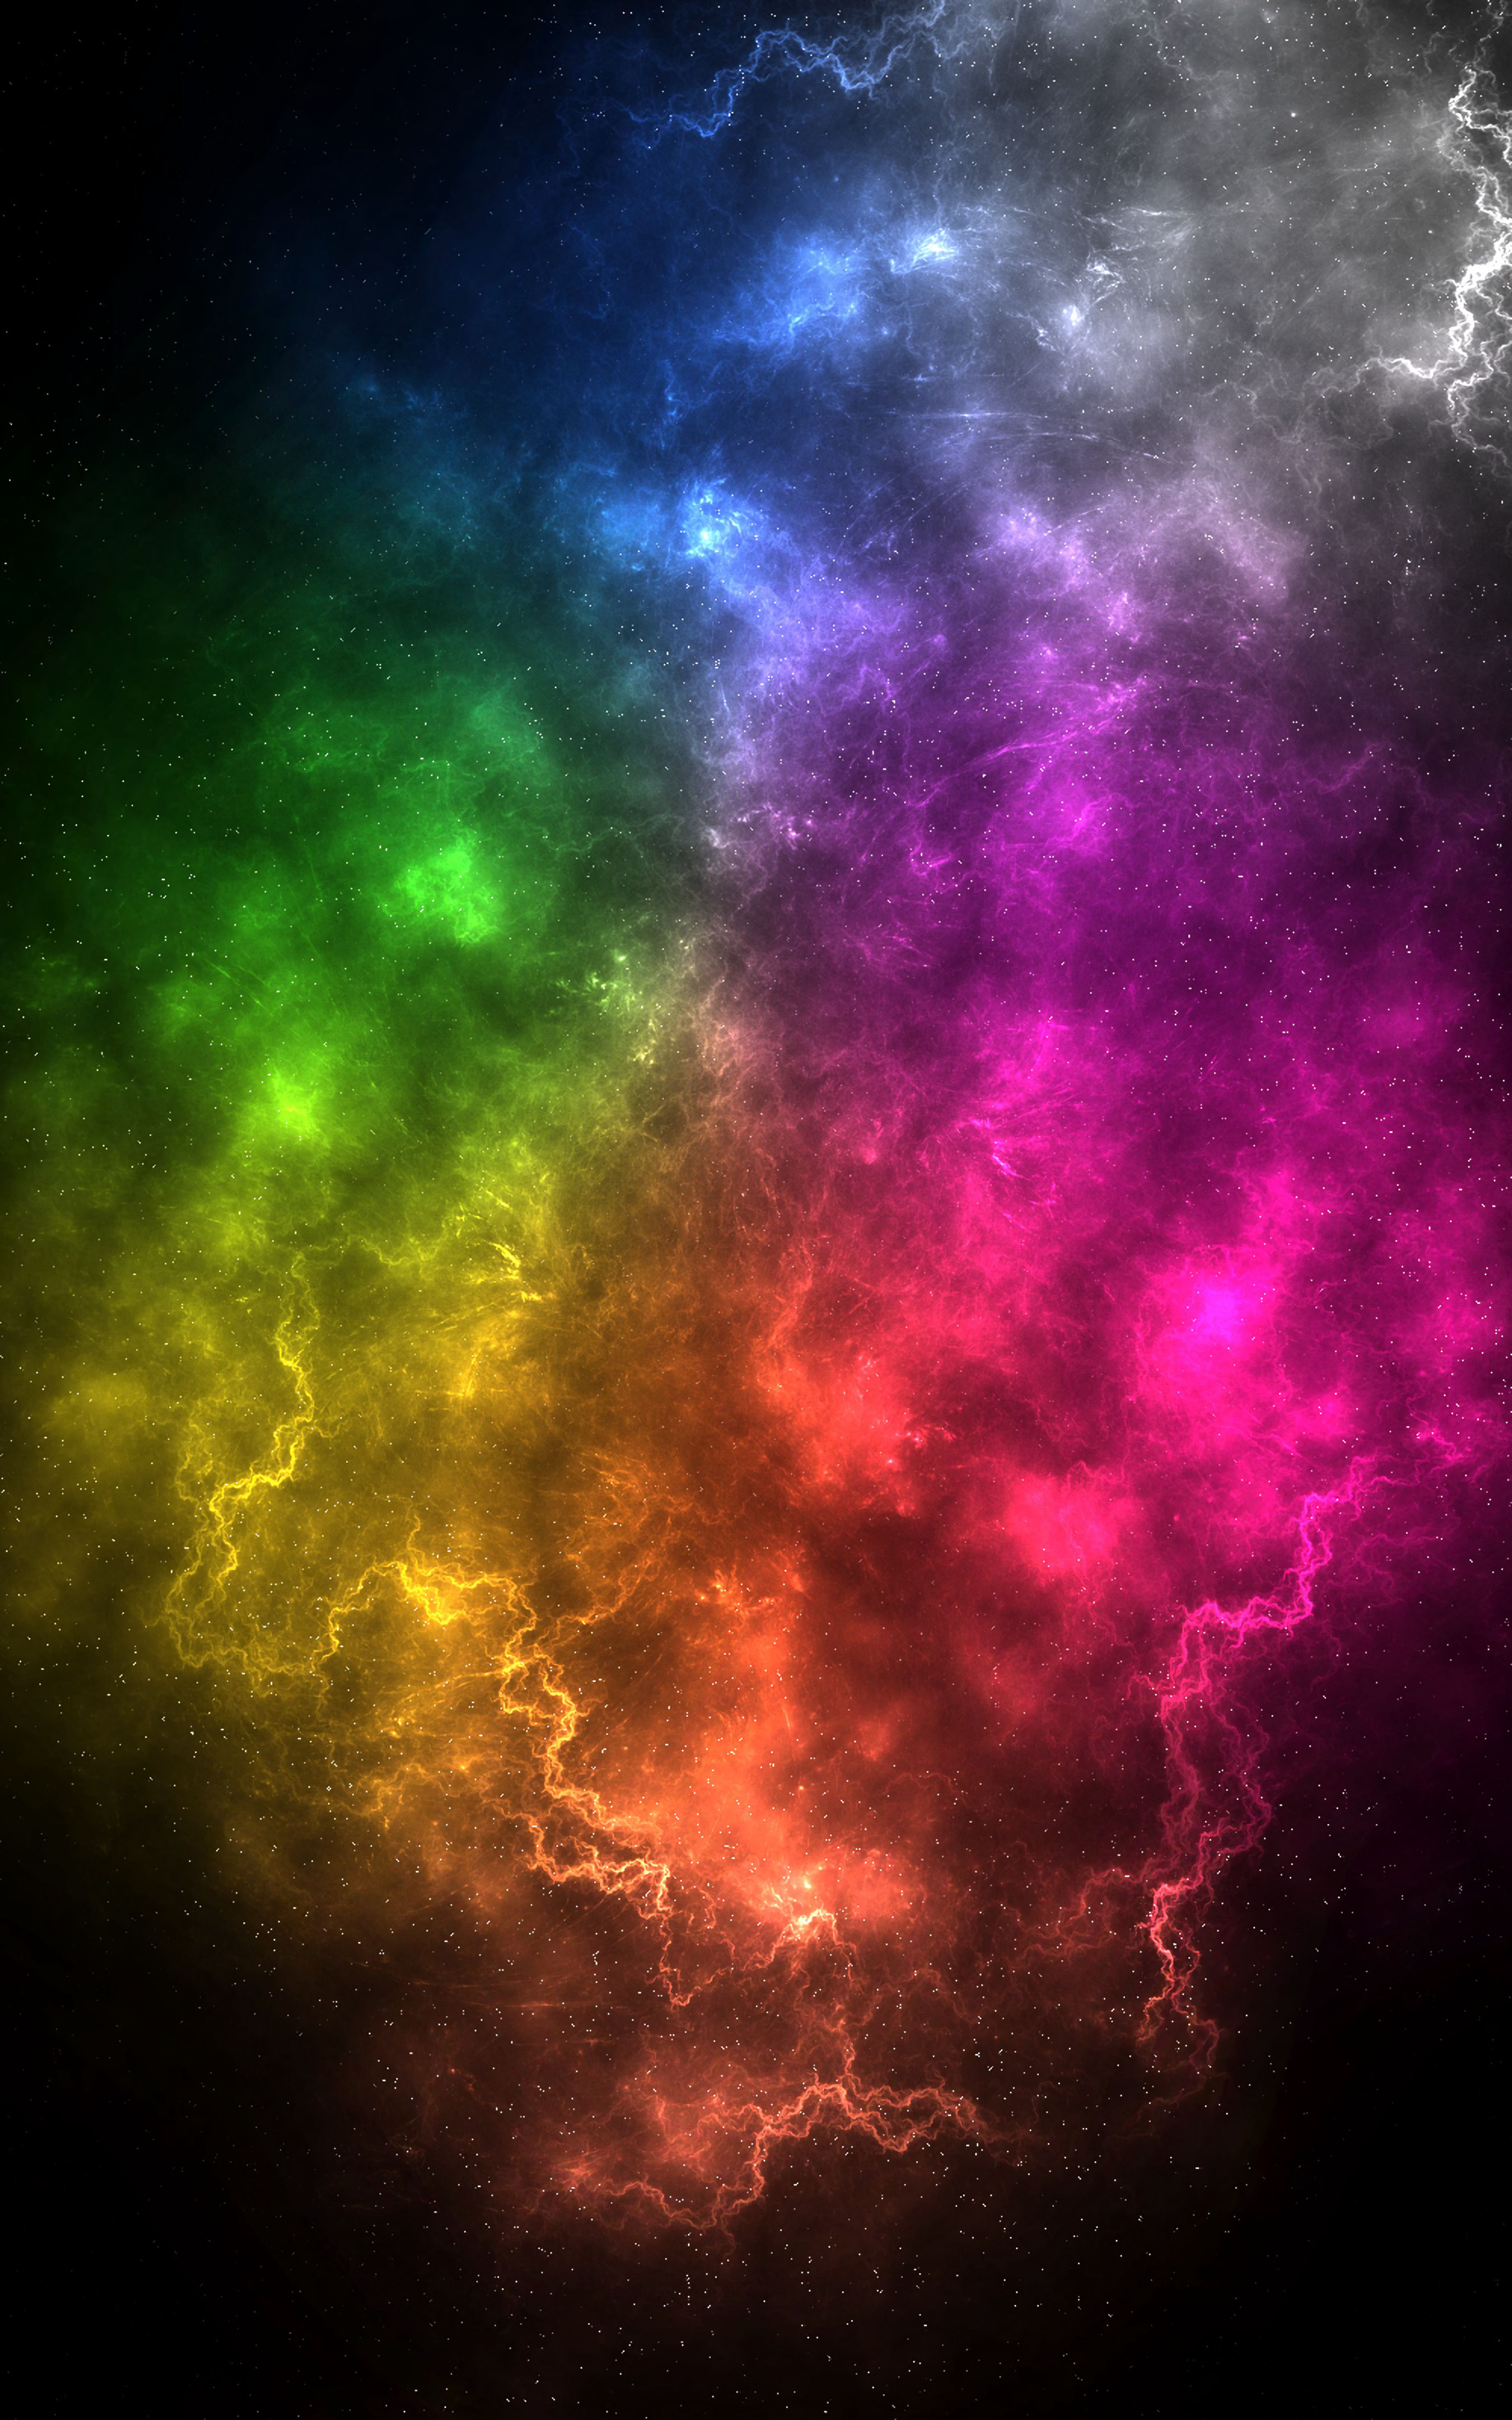 energy, cosmic, nebula, abstract, space, lightning, multicolored, motley, flash, outbreaks